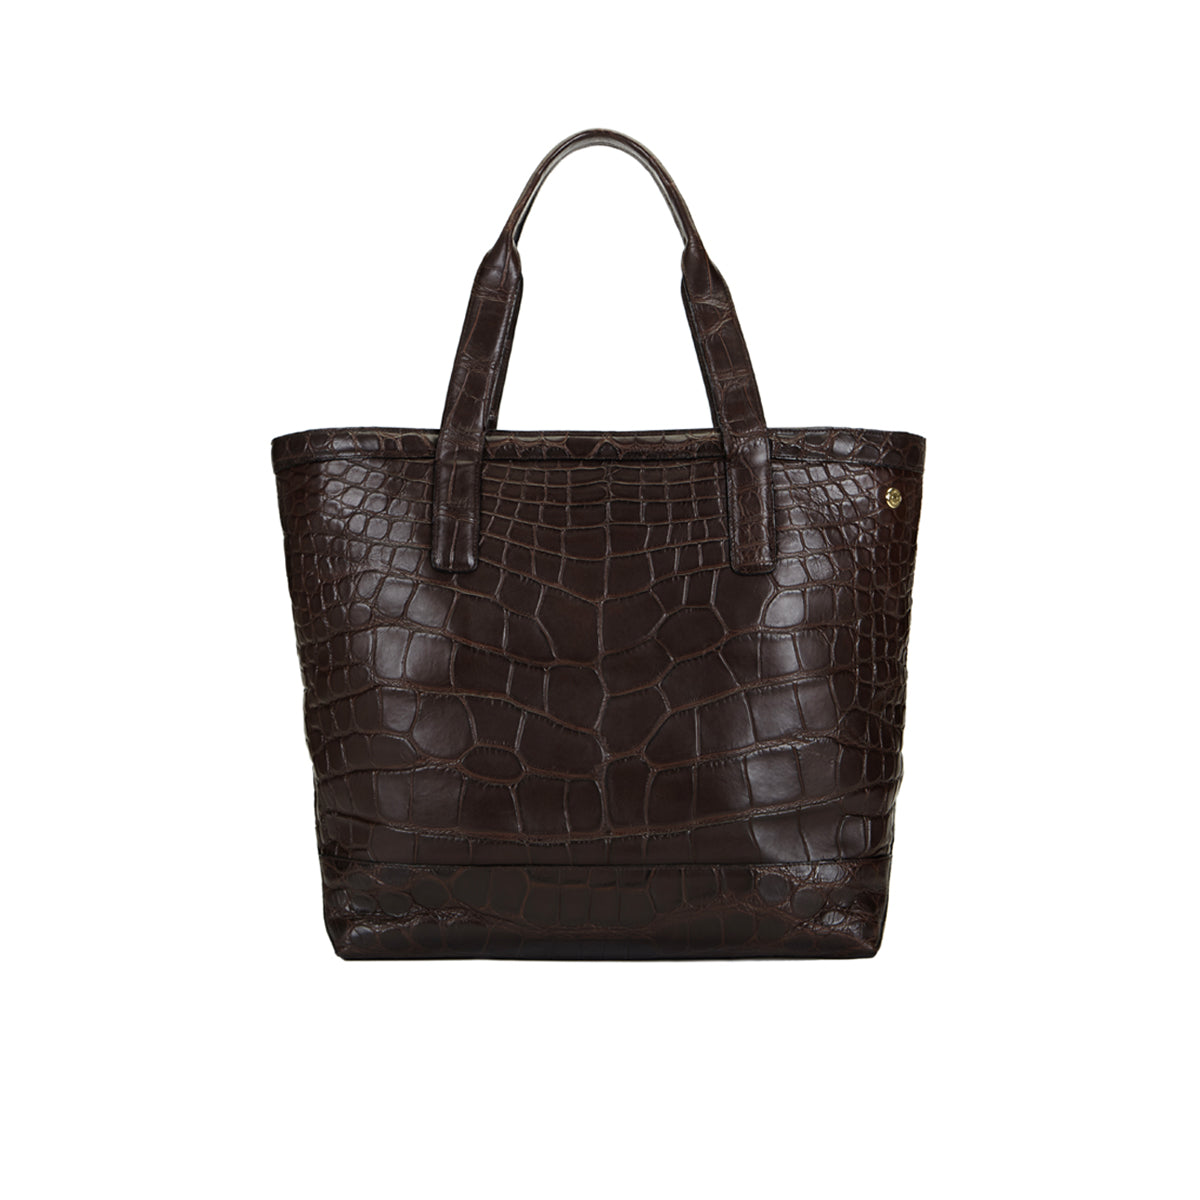 STALVEY Carreon Soft Open Tote in Brown Alligator Front View